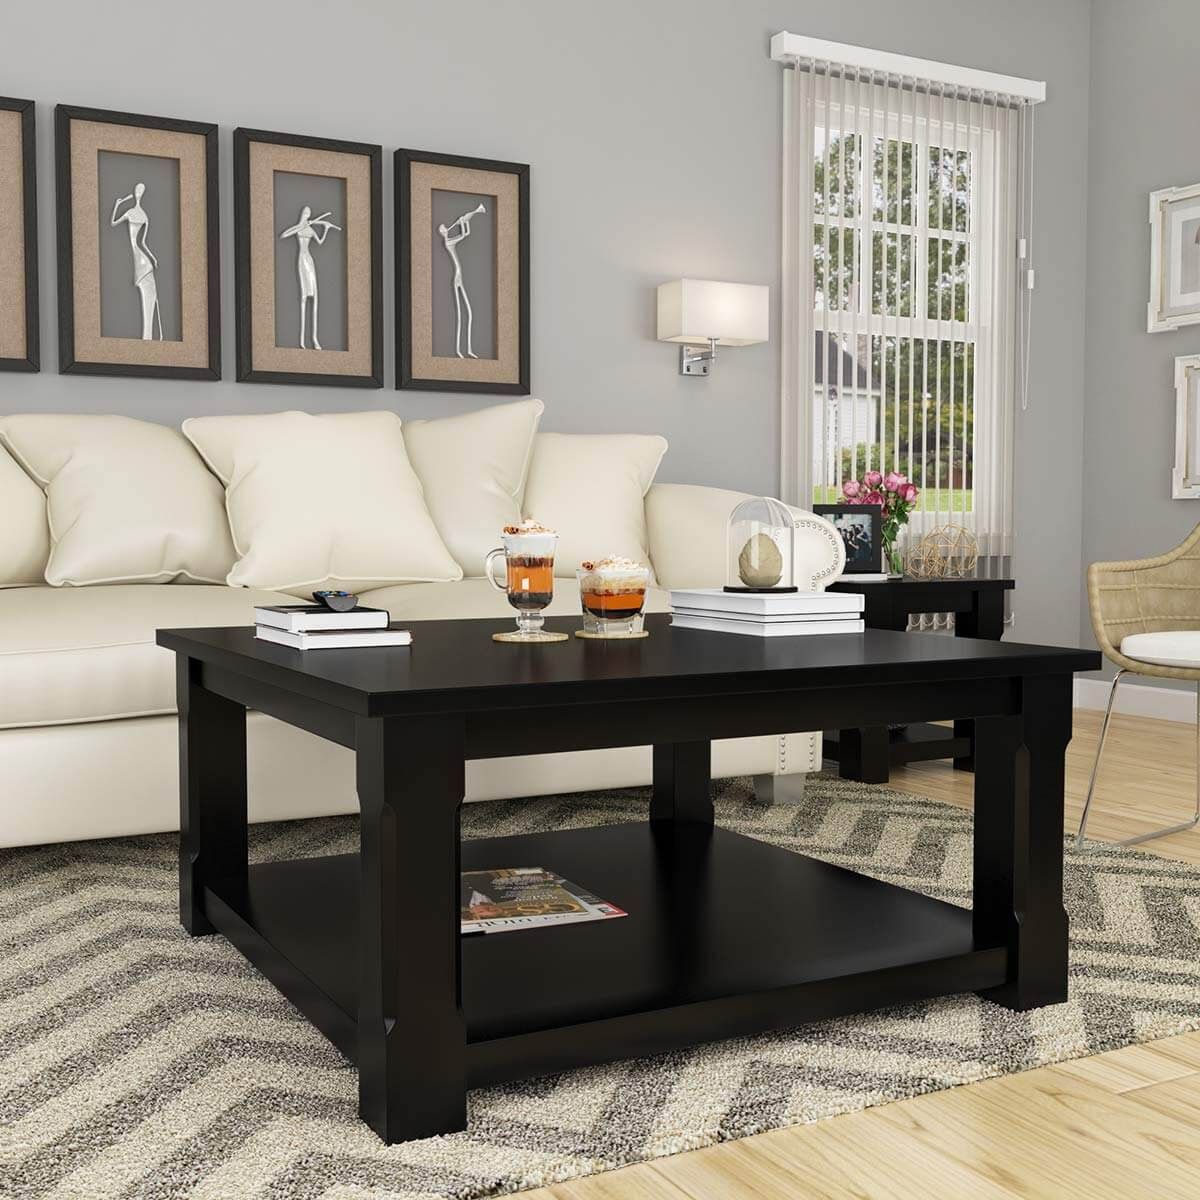 Black Wood Square Coffee Table – Brimson Contemporary Style Solid Wood With Square Console Tables (View 5 of 20)